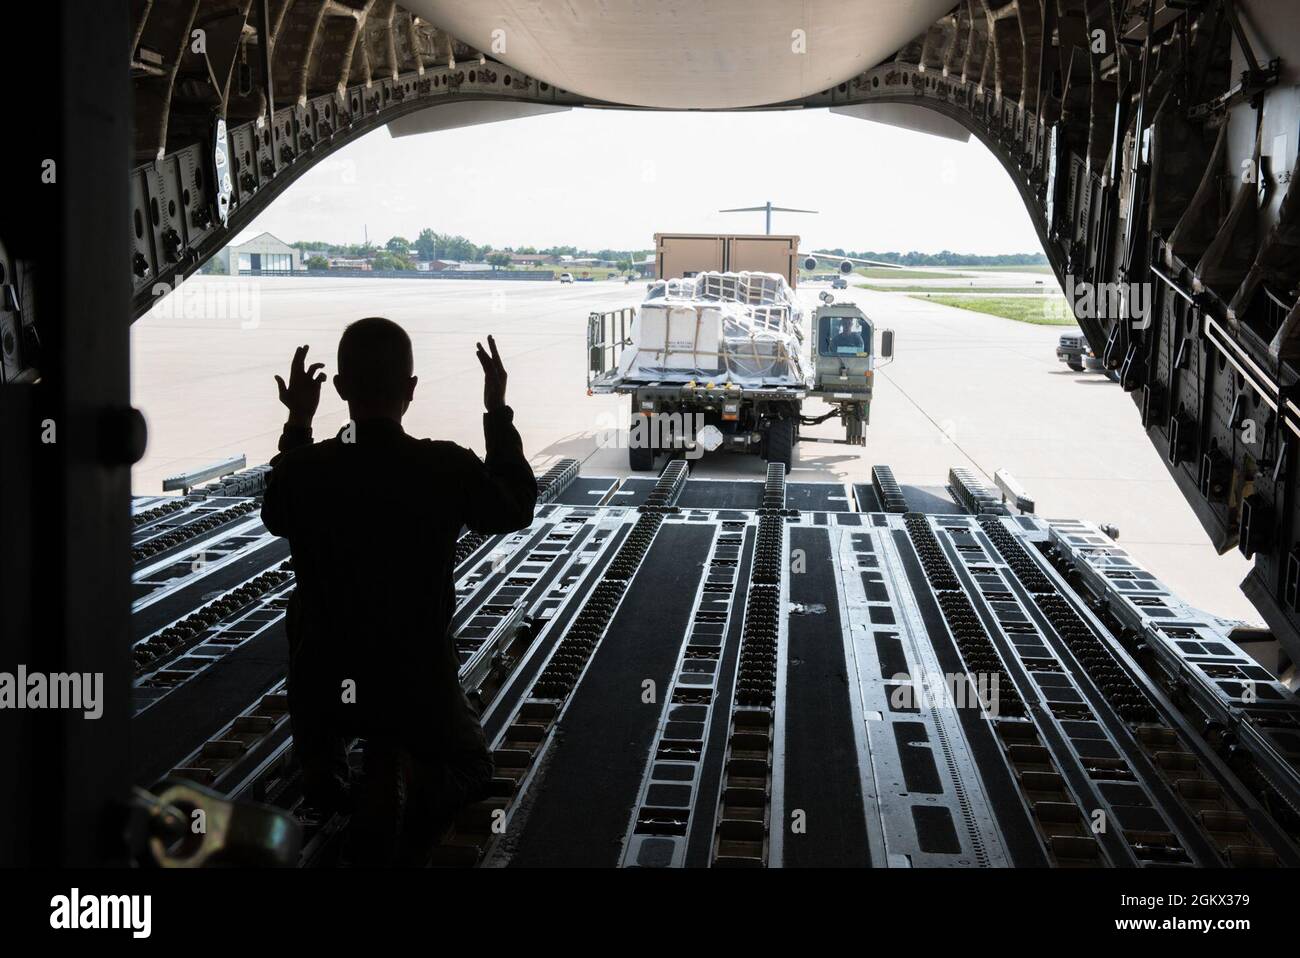 U.S. Air Force Airman 1st Class Sam Bartolomeo, a loadmaster with the 167th Operations Group, directs Staff Sgt. James Ford, an aerial transportation specialist with the 123rd Airlift Wing, Kentucky National Guard, while palletized cargo is loaded onto a C-17 Globemaster III aircraft using a container loader during a cargo loading exercise at the 167th Airlift Wing, Martinsburg, West Virginia, Jul. 14, 2021. The 167th hosted members from the 123rd for a small air terminal training in preparation for their upcoming deployment. Stock Photo